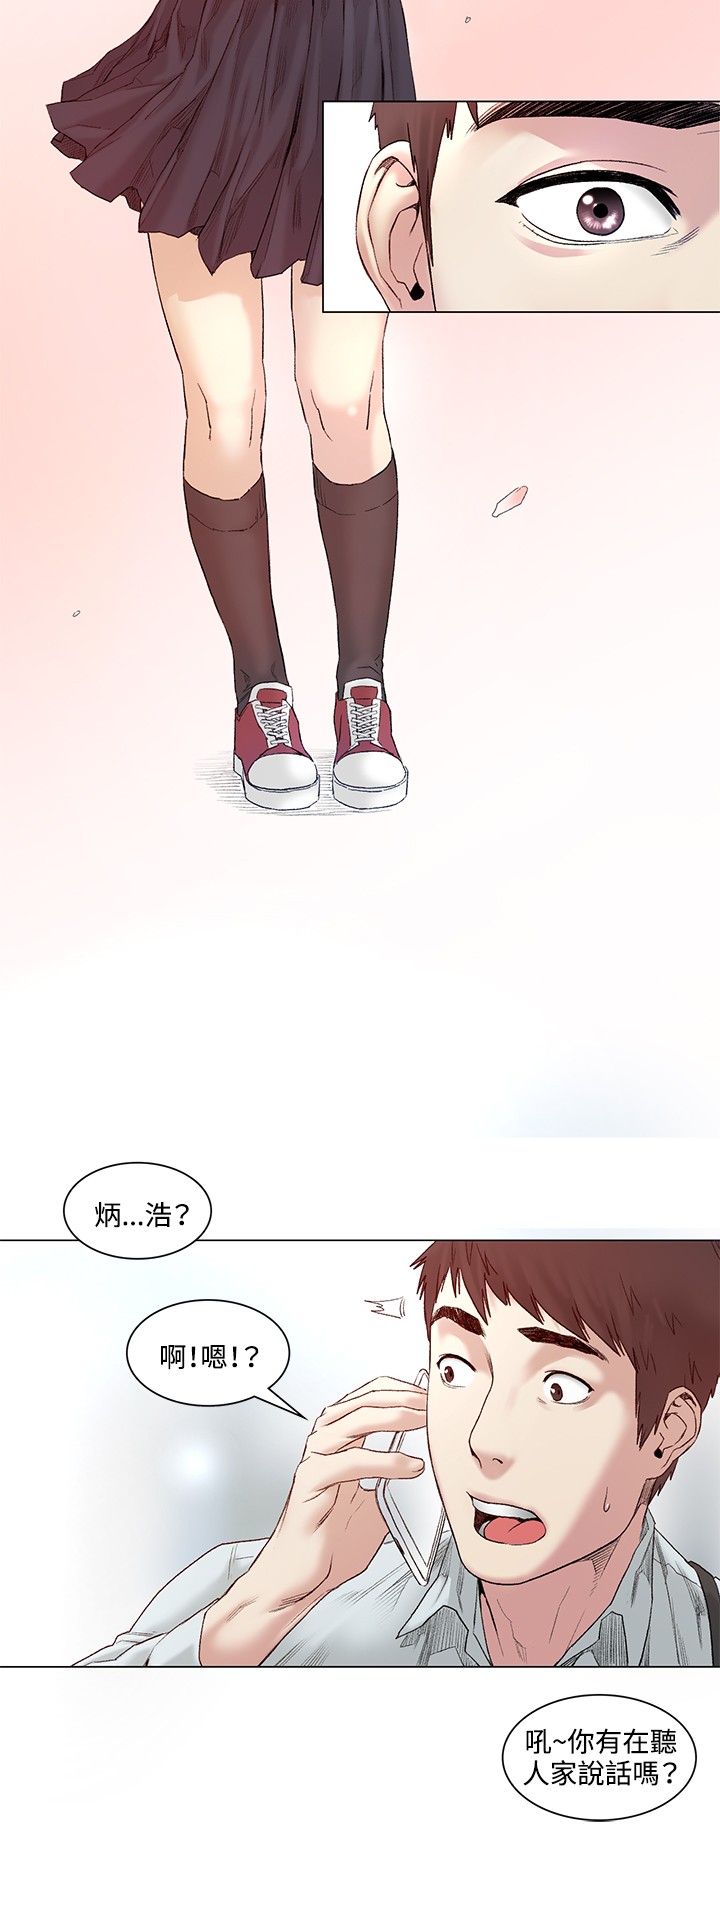 By Chance 偶然 Ch.52END (chinese) [嘮叨雞 &洋世] 偶然